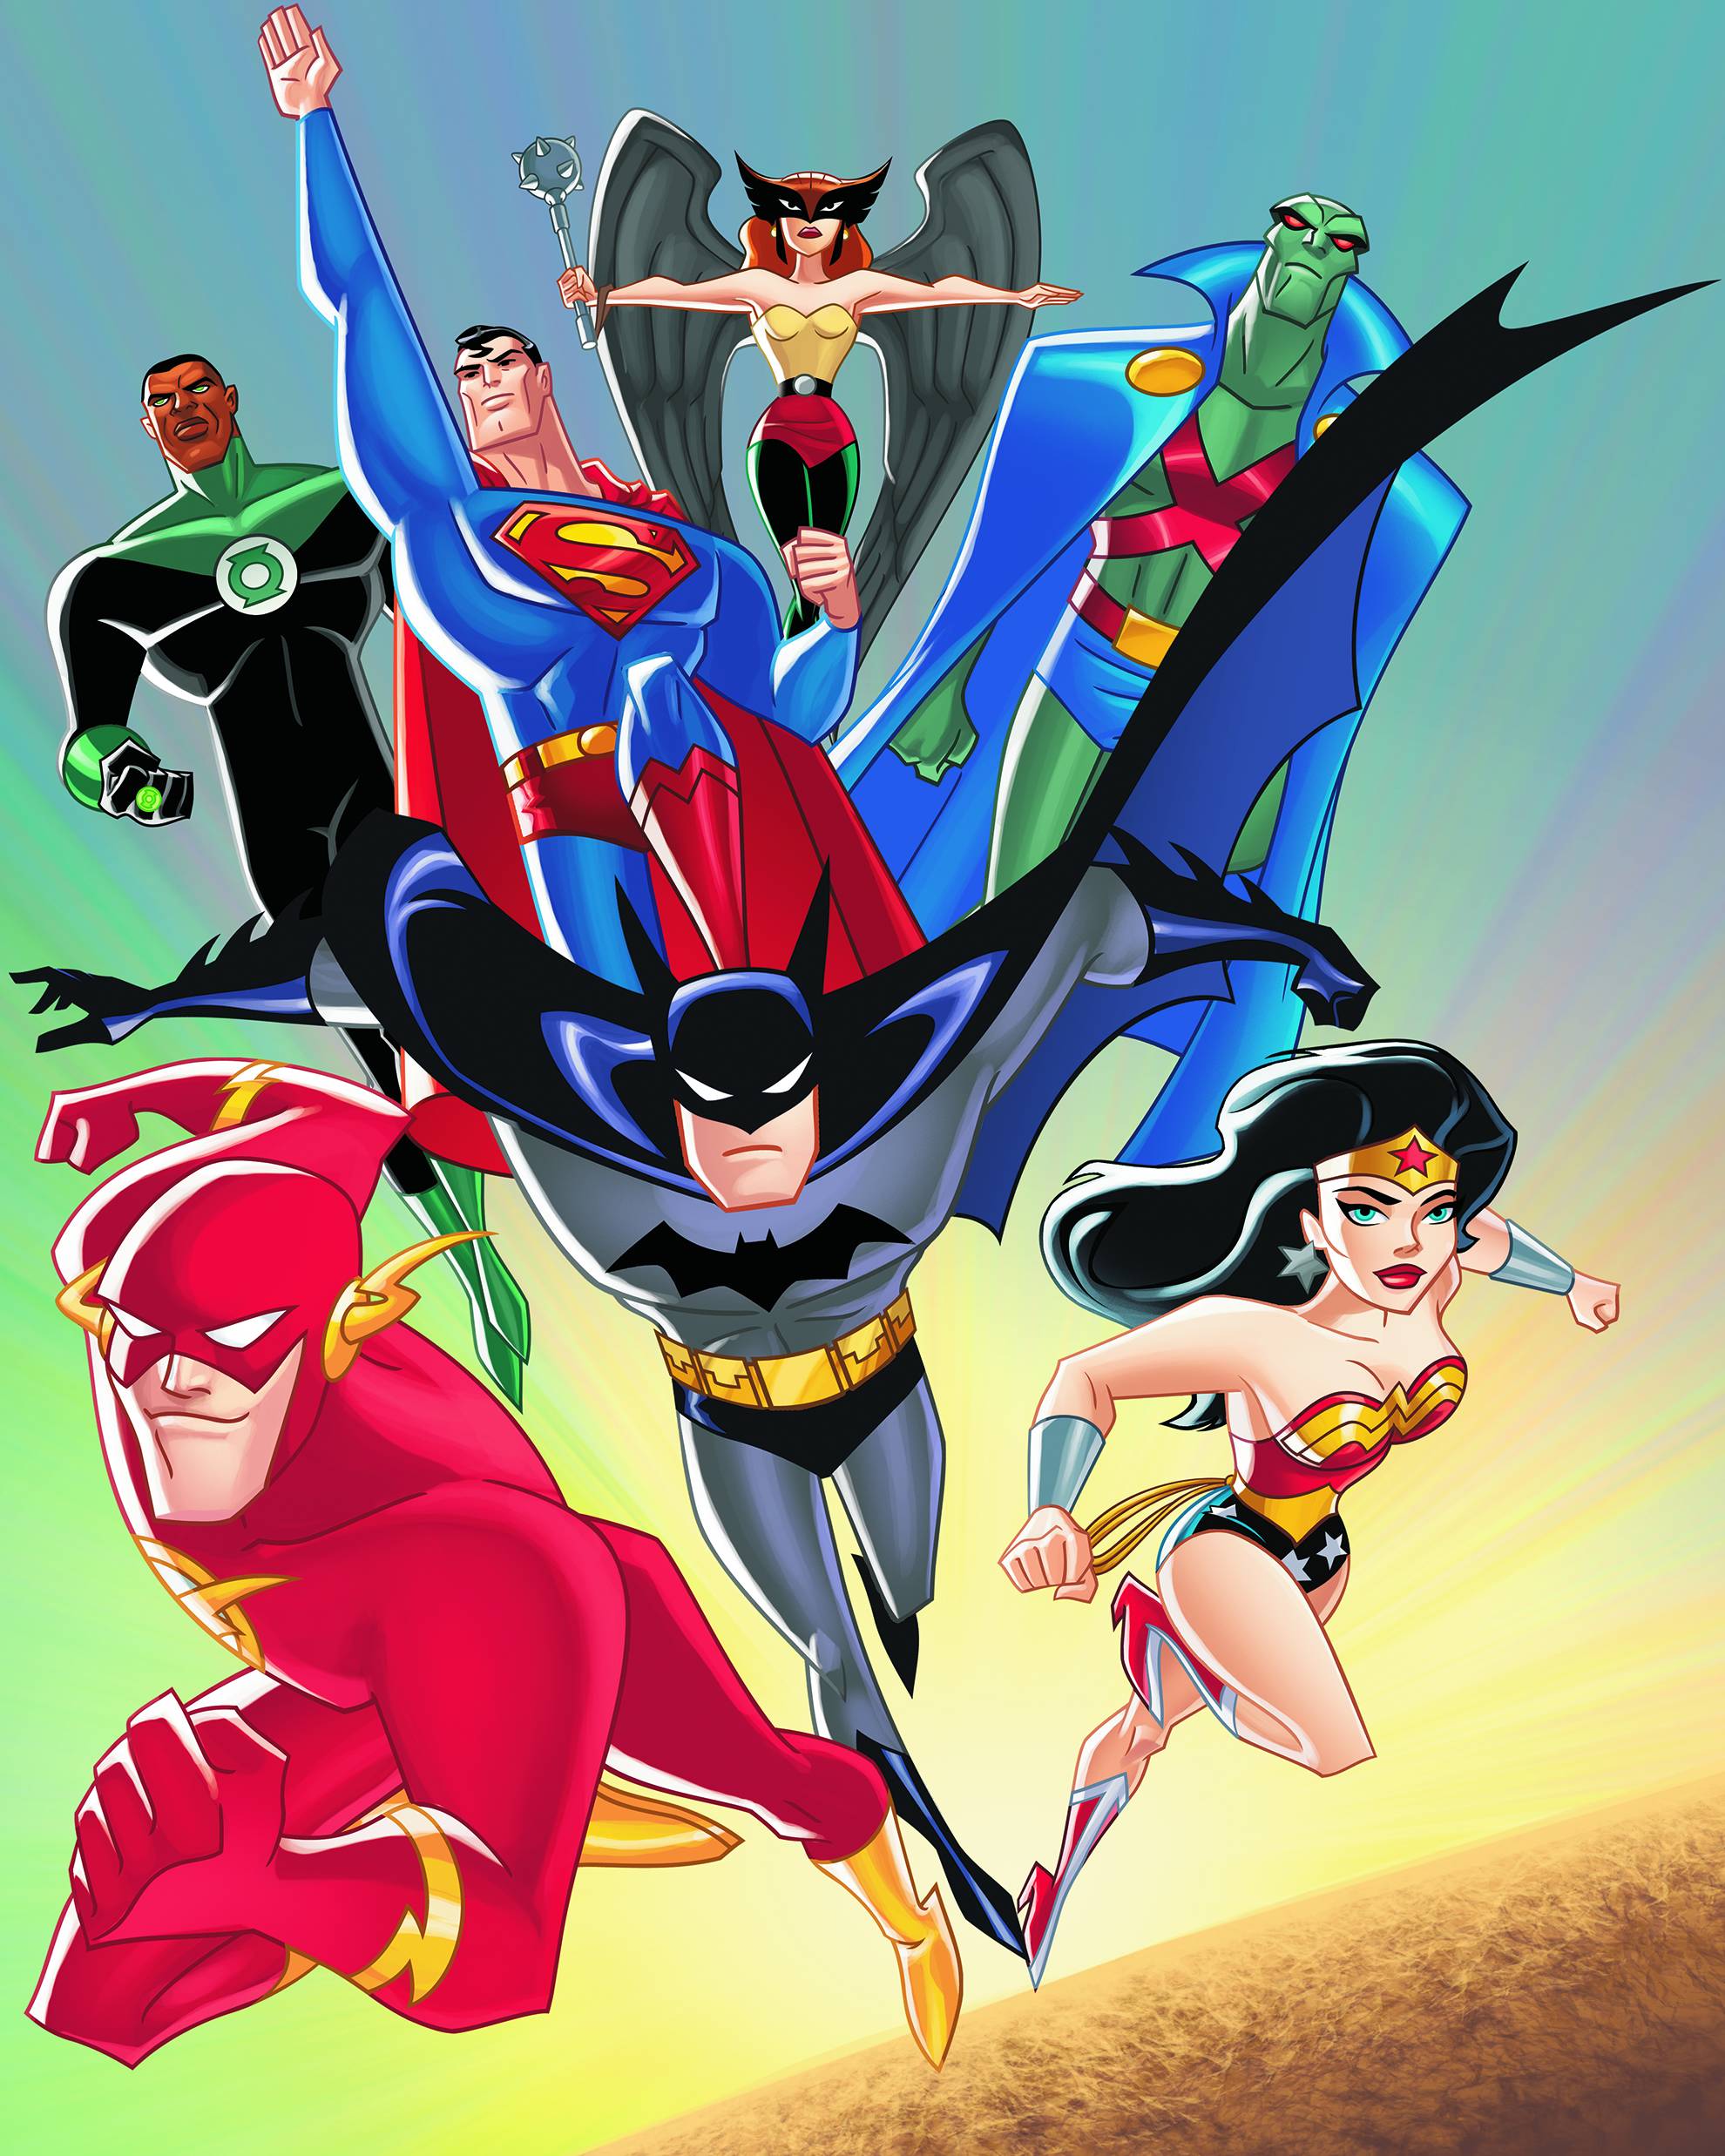 Cartoons Background In High Quality: Justice League Unlimited